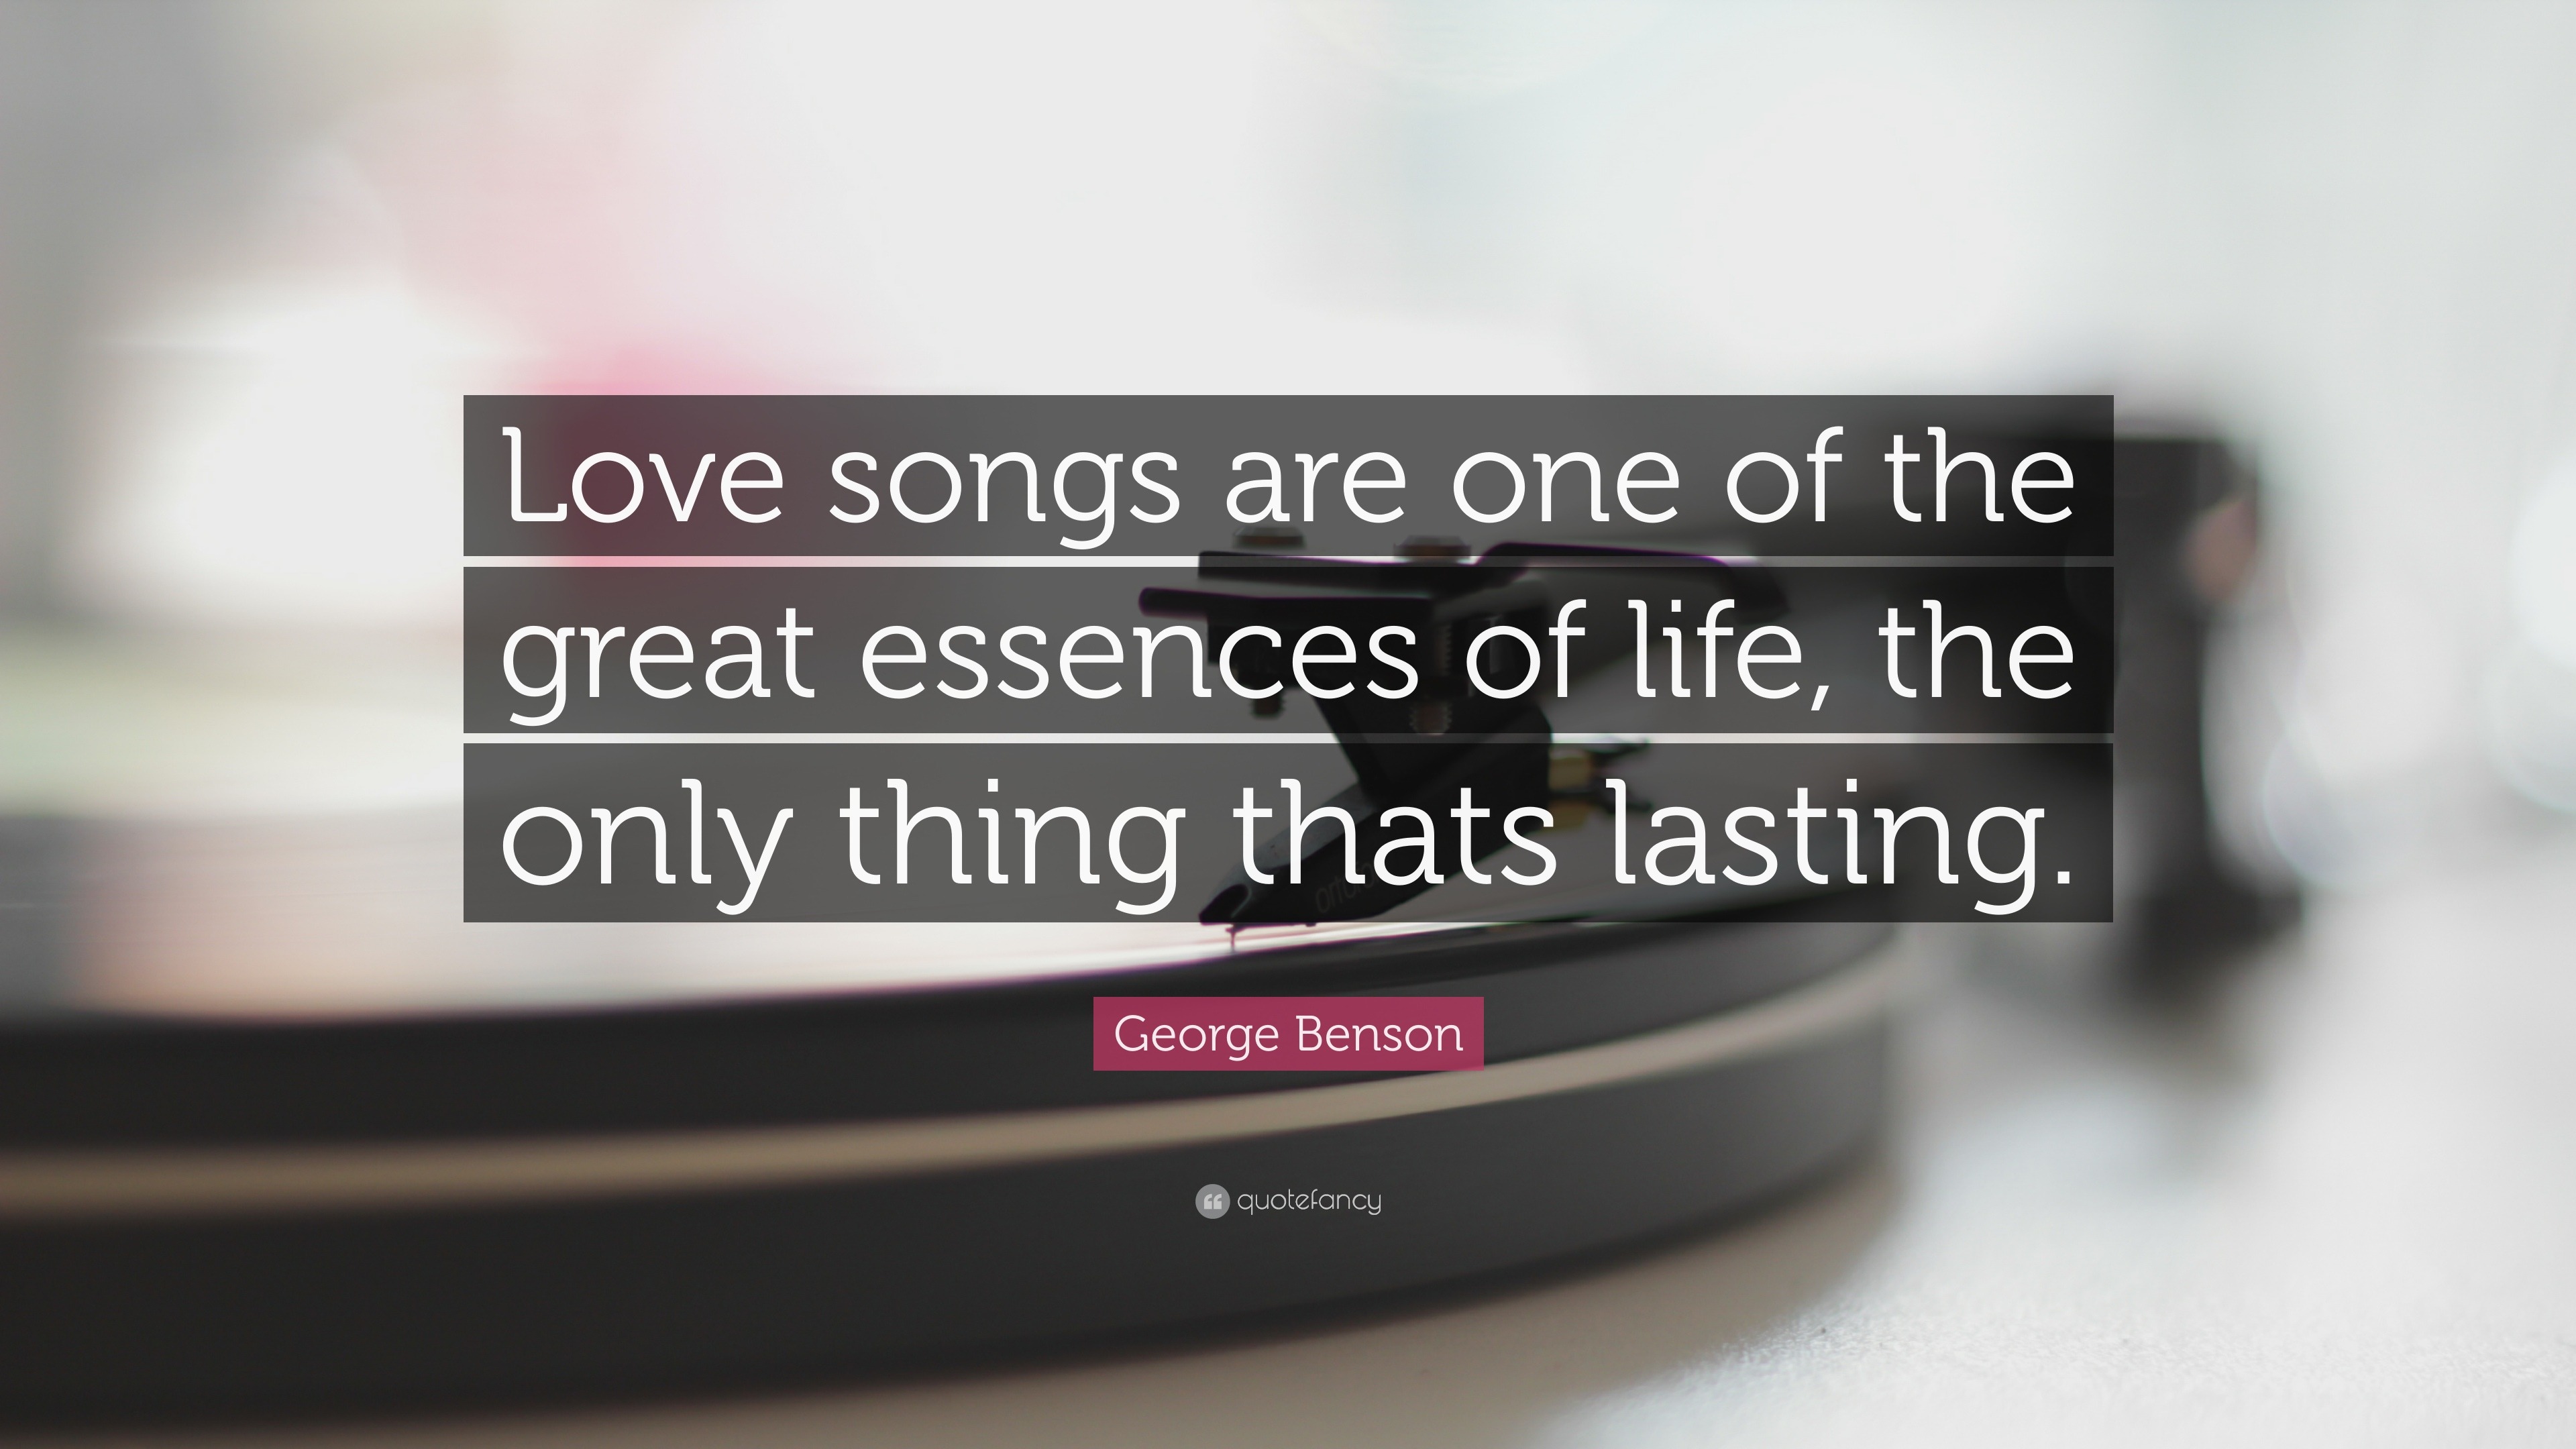 George Benson Quote: "Love songs are one of the great essenc